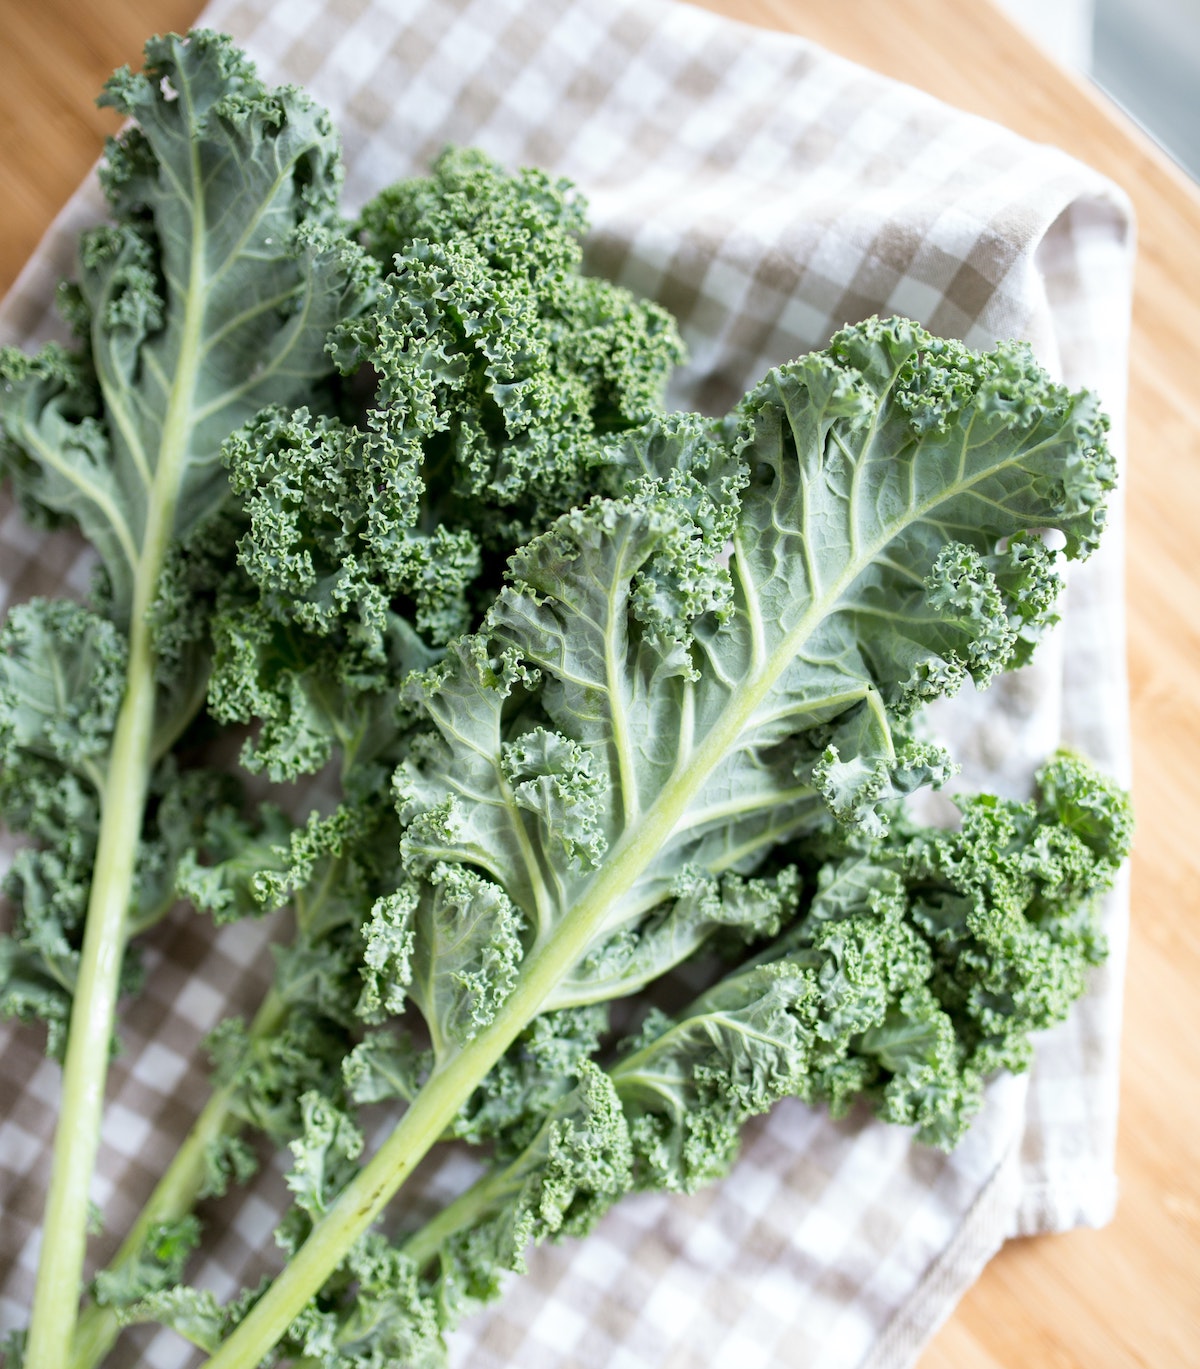 Tried & Tested: 3 Easy Recipes from the I Hate Kale Cookbook That Made me Like Kale